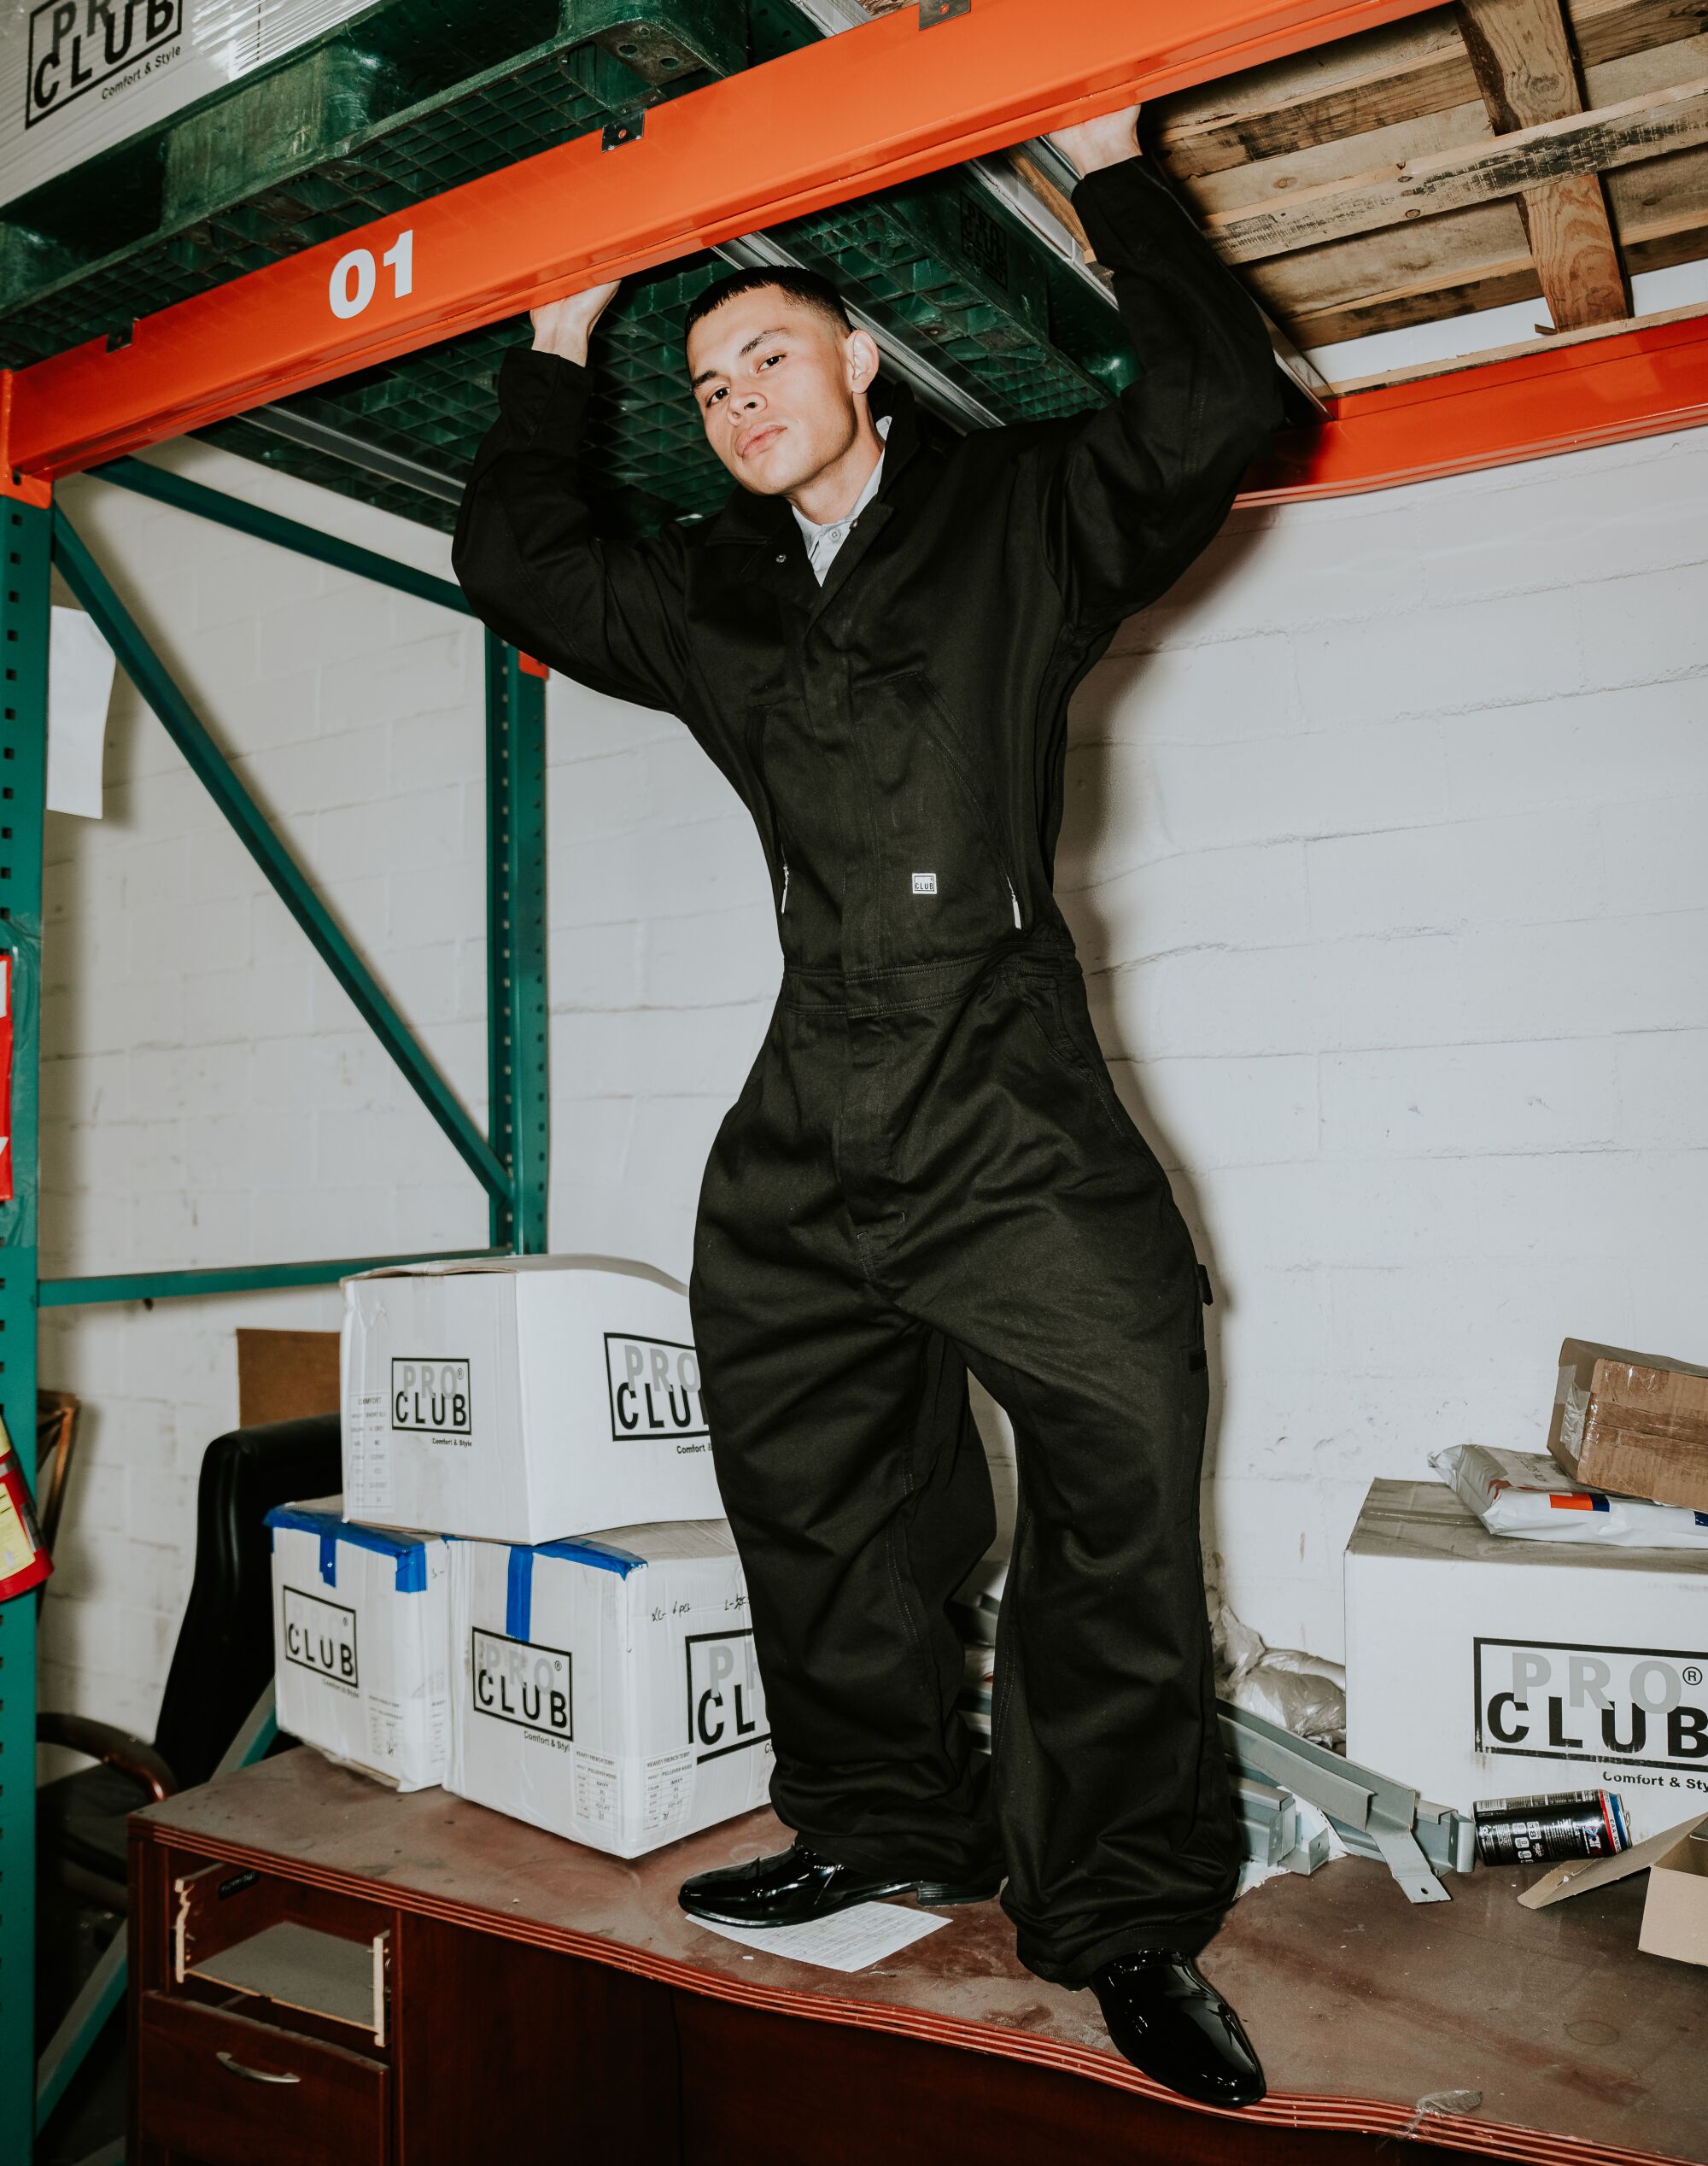 A model wears a Pro Club outfit in the brand's warehouse.